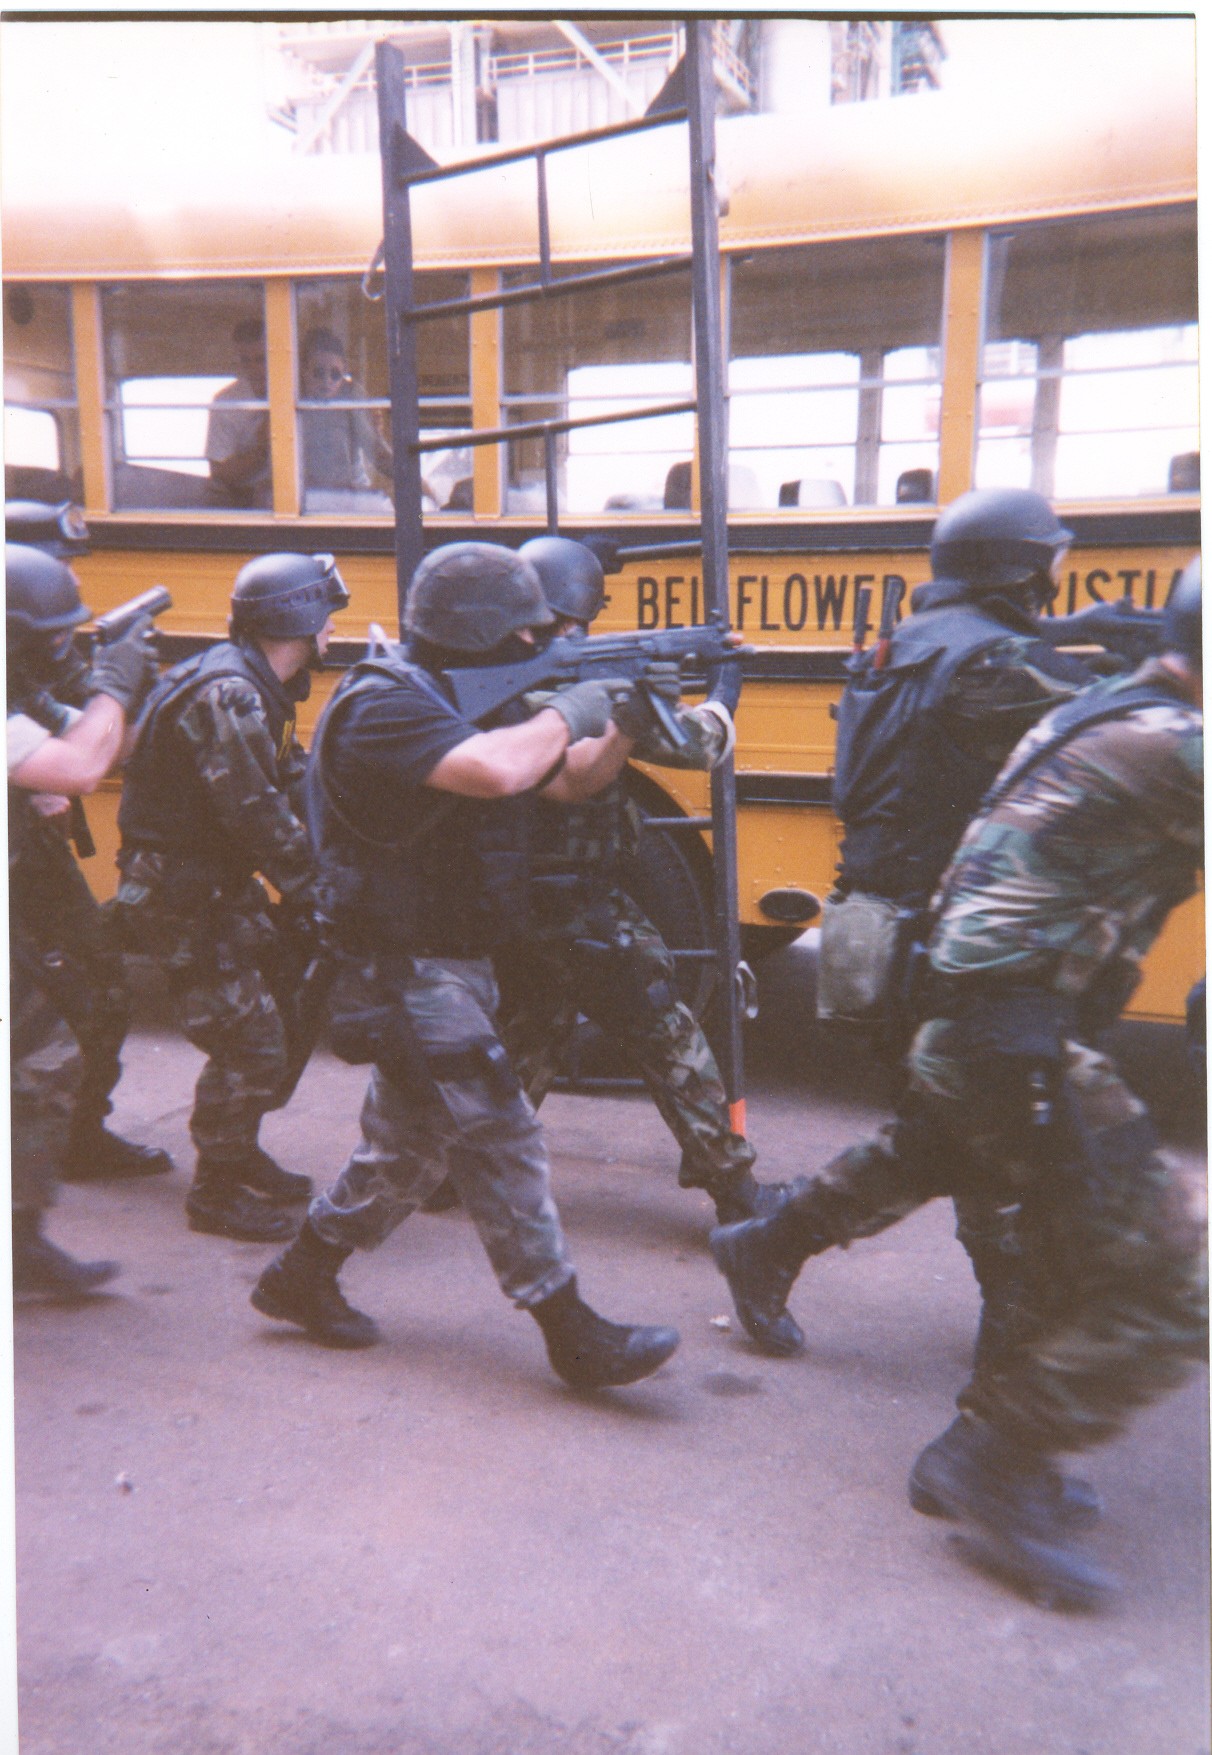 30+ years Jim has trained SWAT teams (like the one in the photo in Jim's Bus Assault course), military units,  private security companies firearms course.